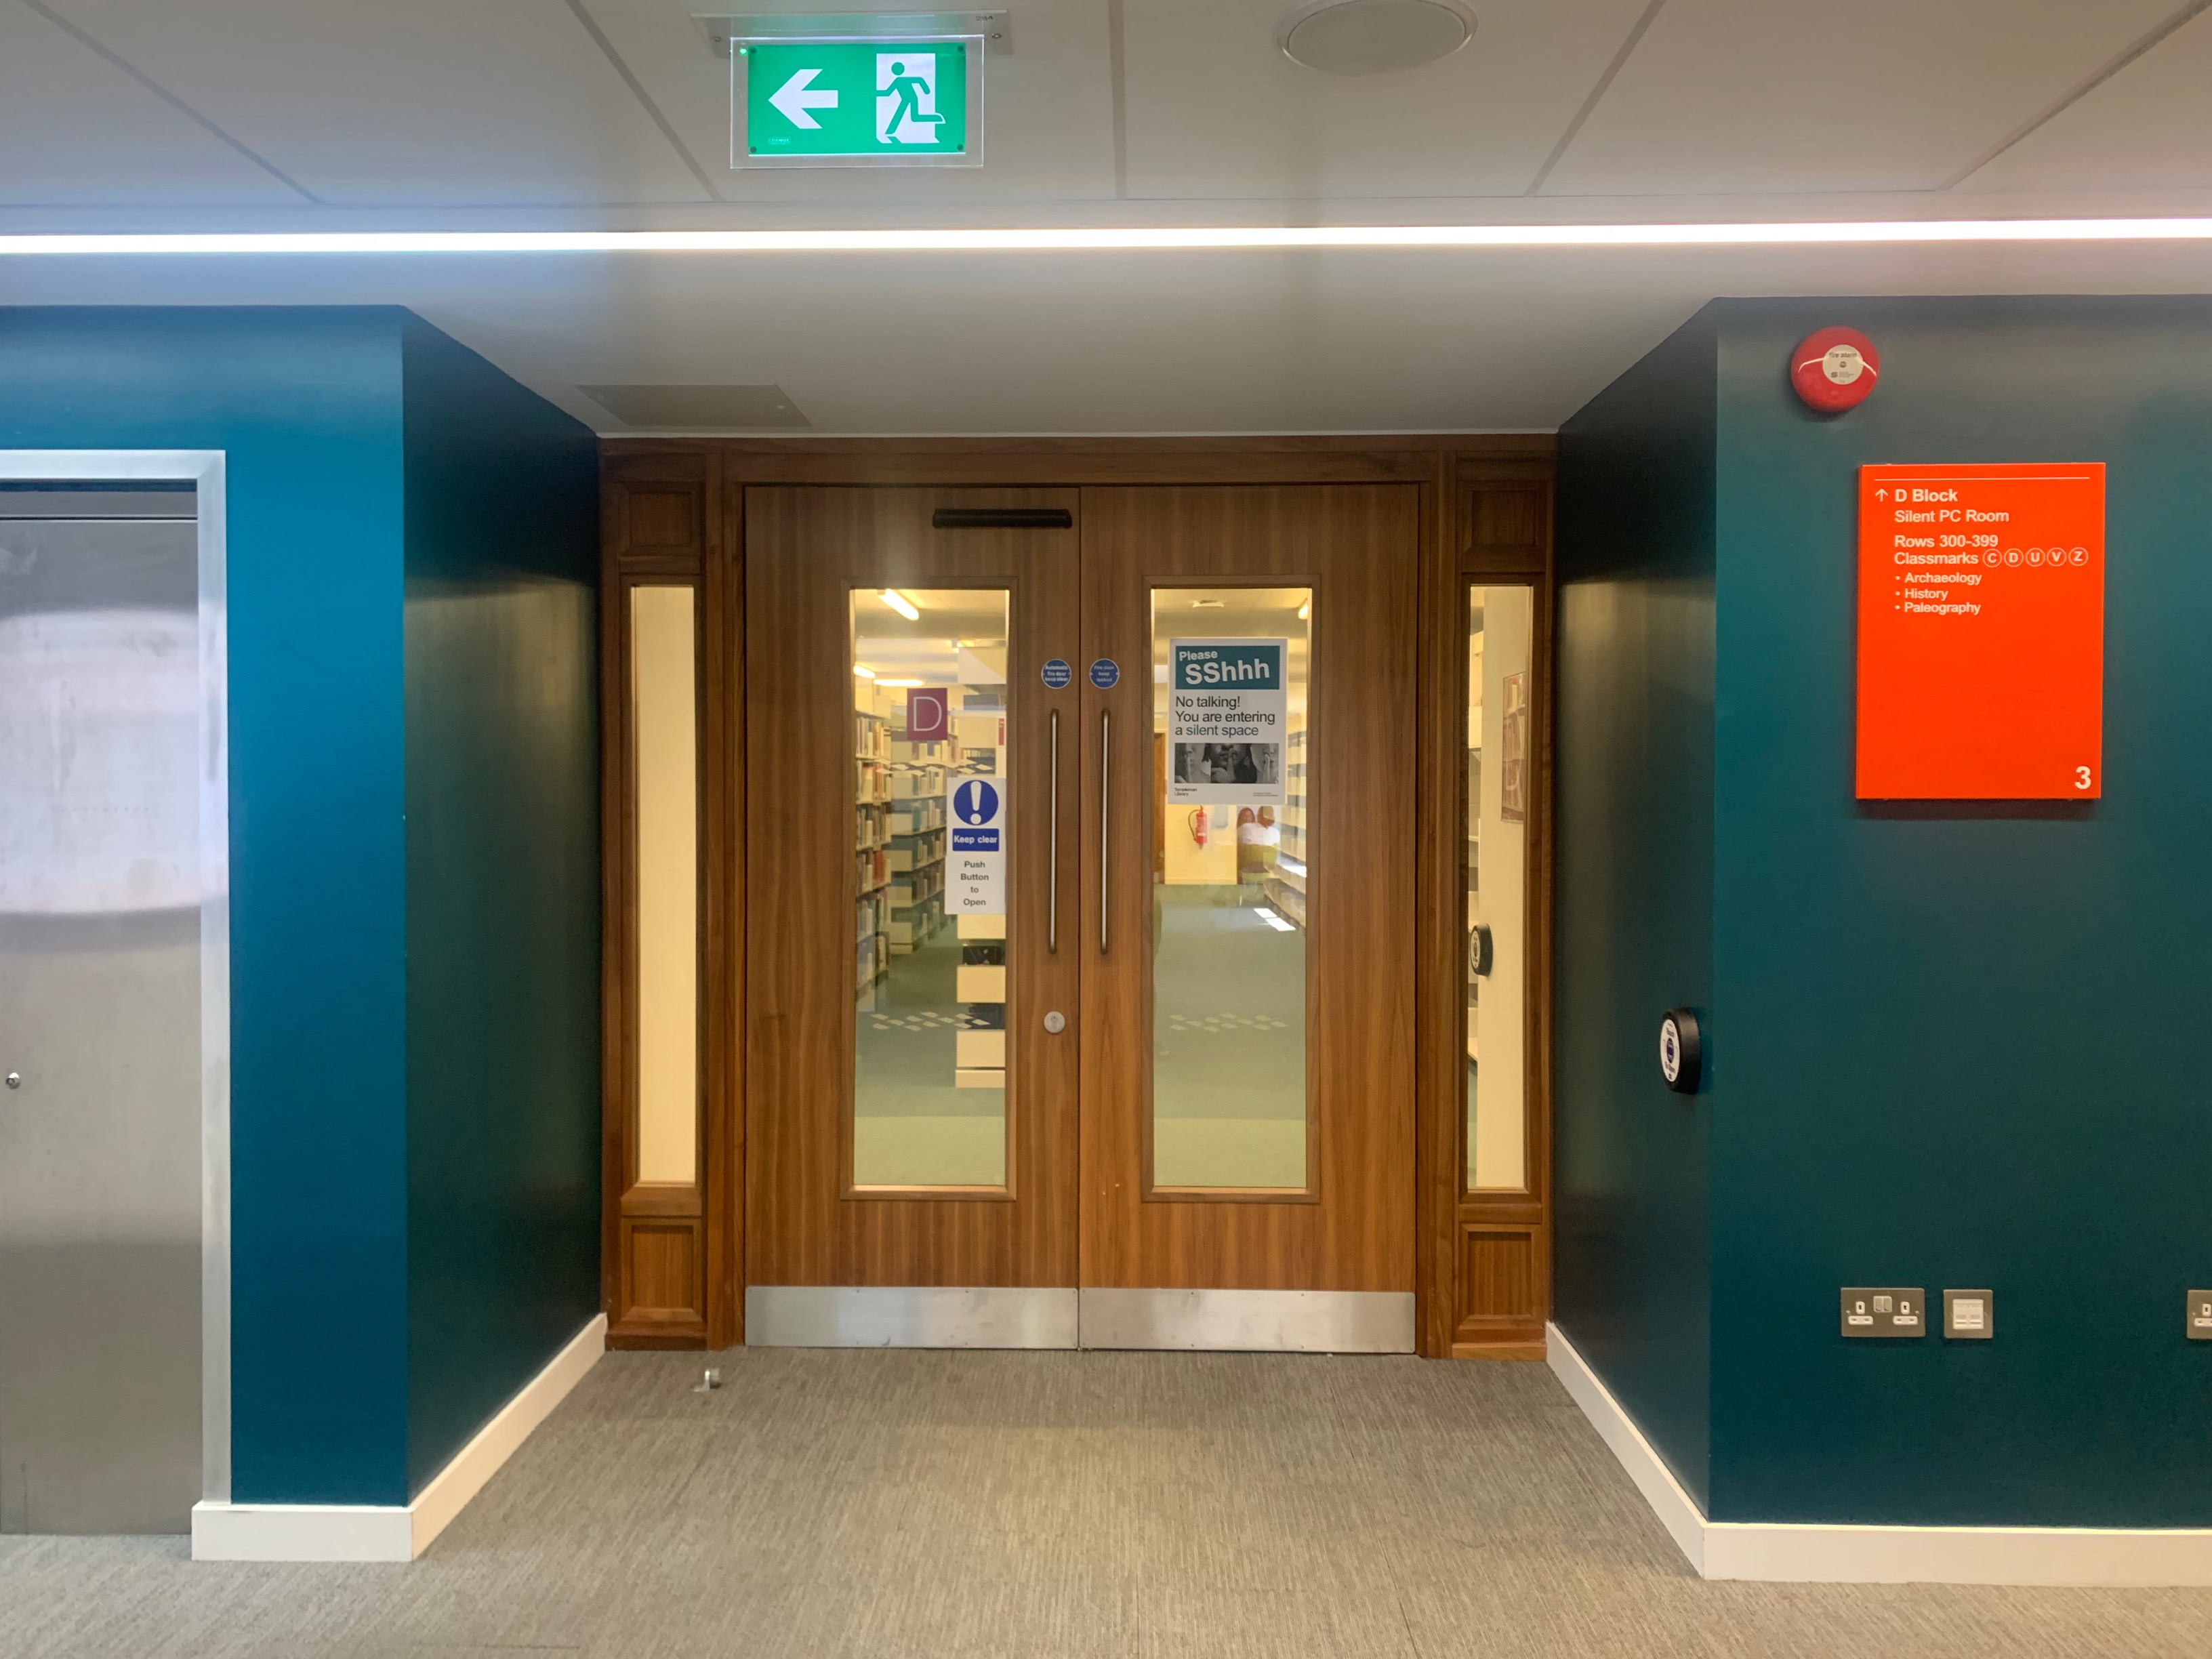 Photo of entrance to Block D, Floor 3 in Templeman Library